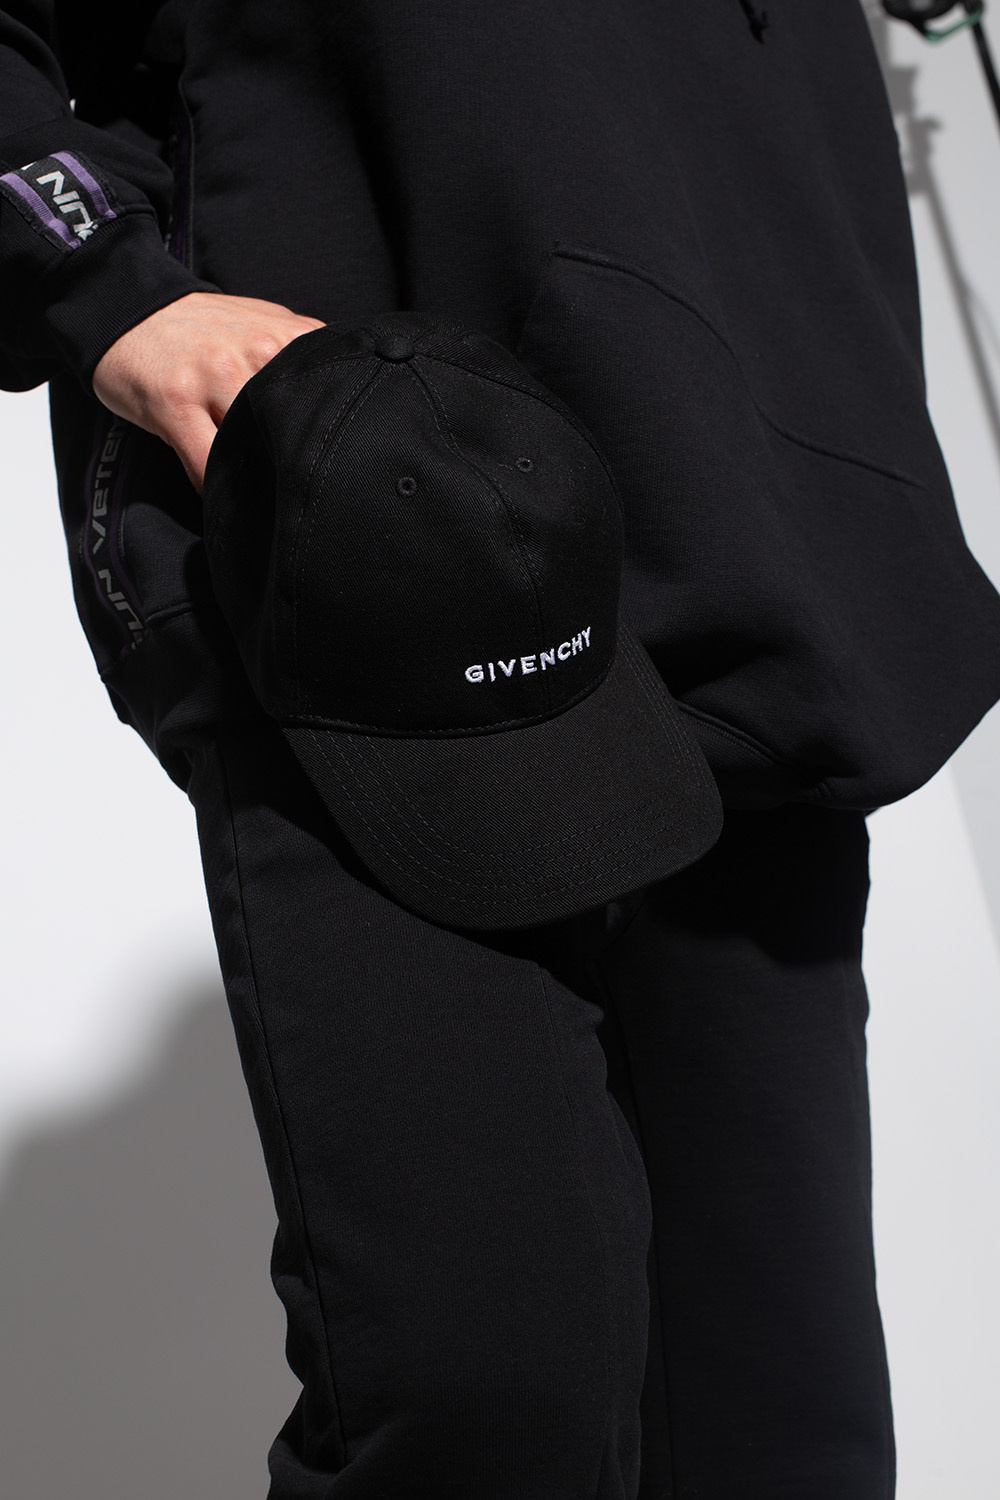 givenchy Leather Logo-embroidered baseball cap